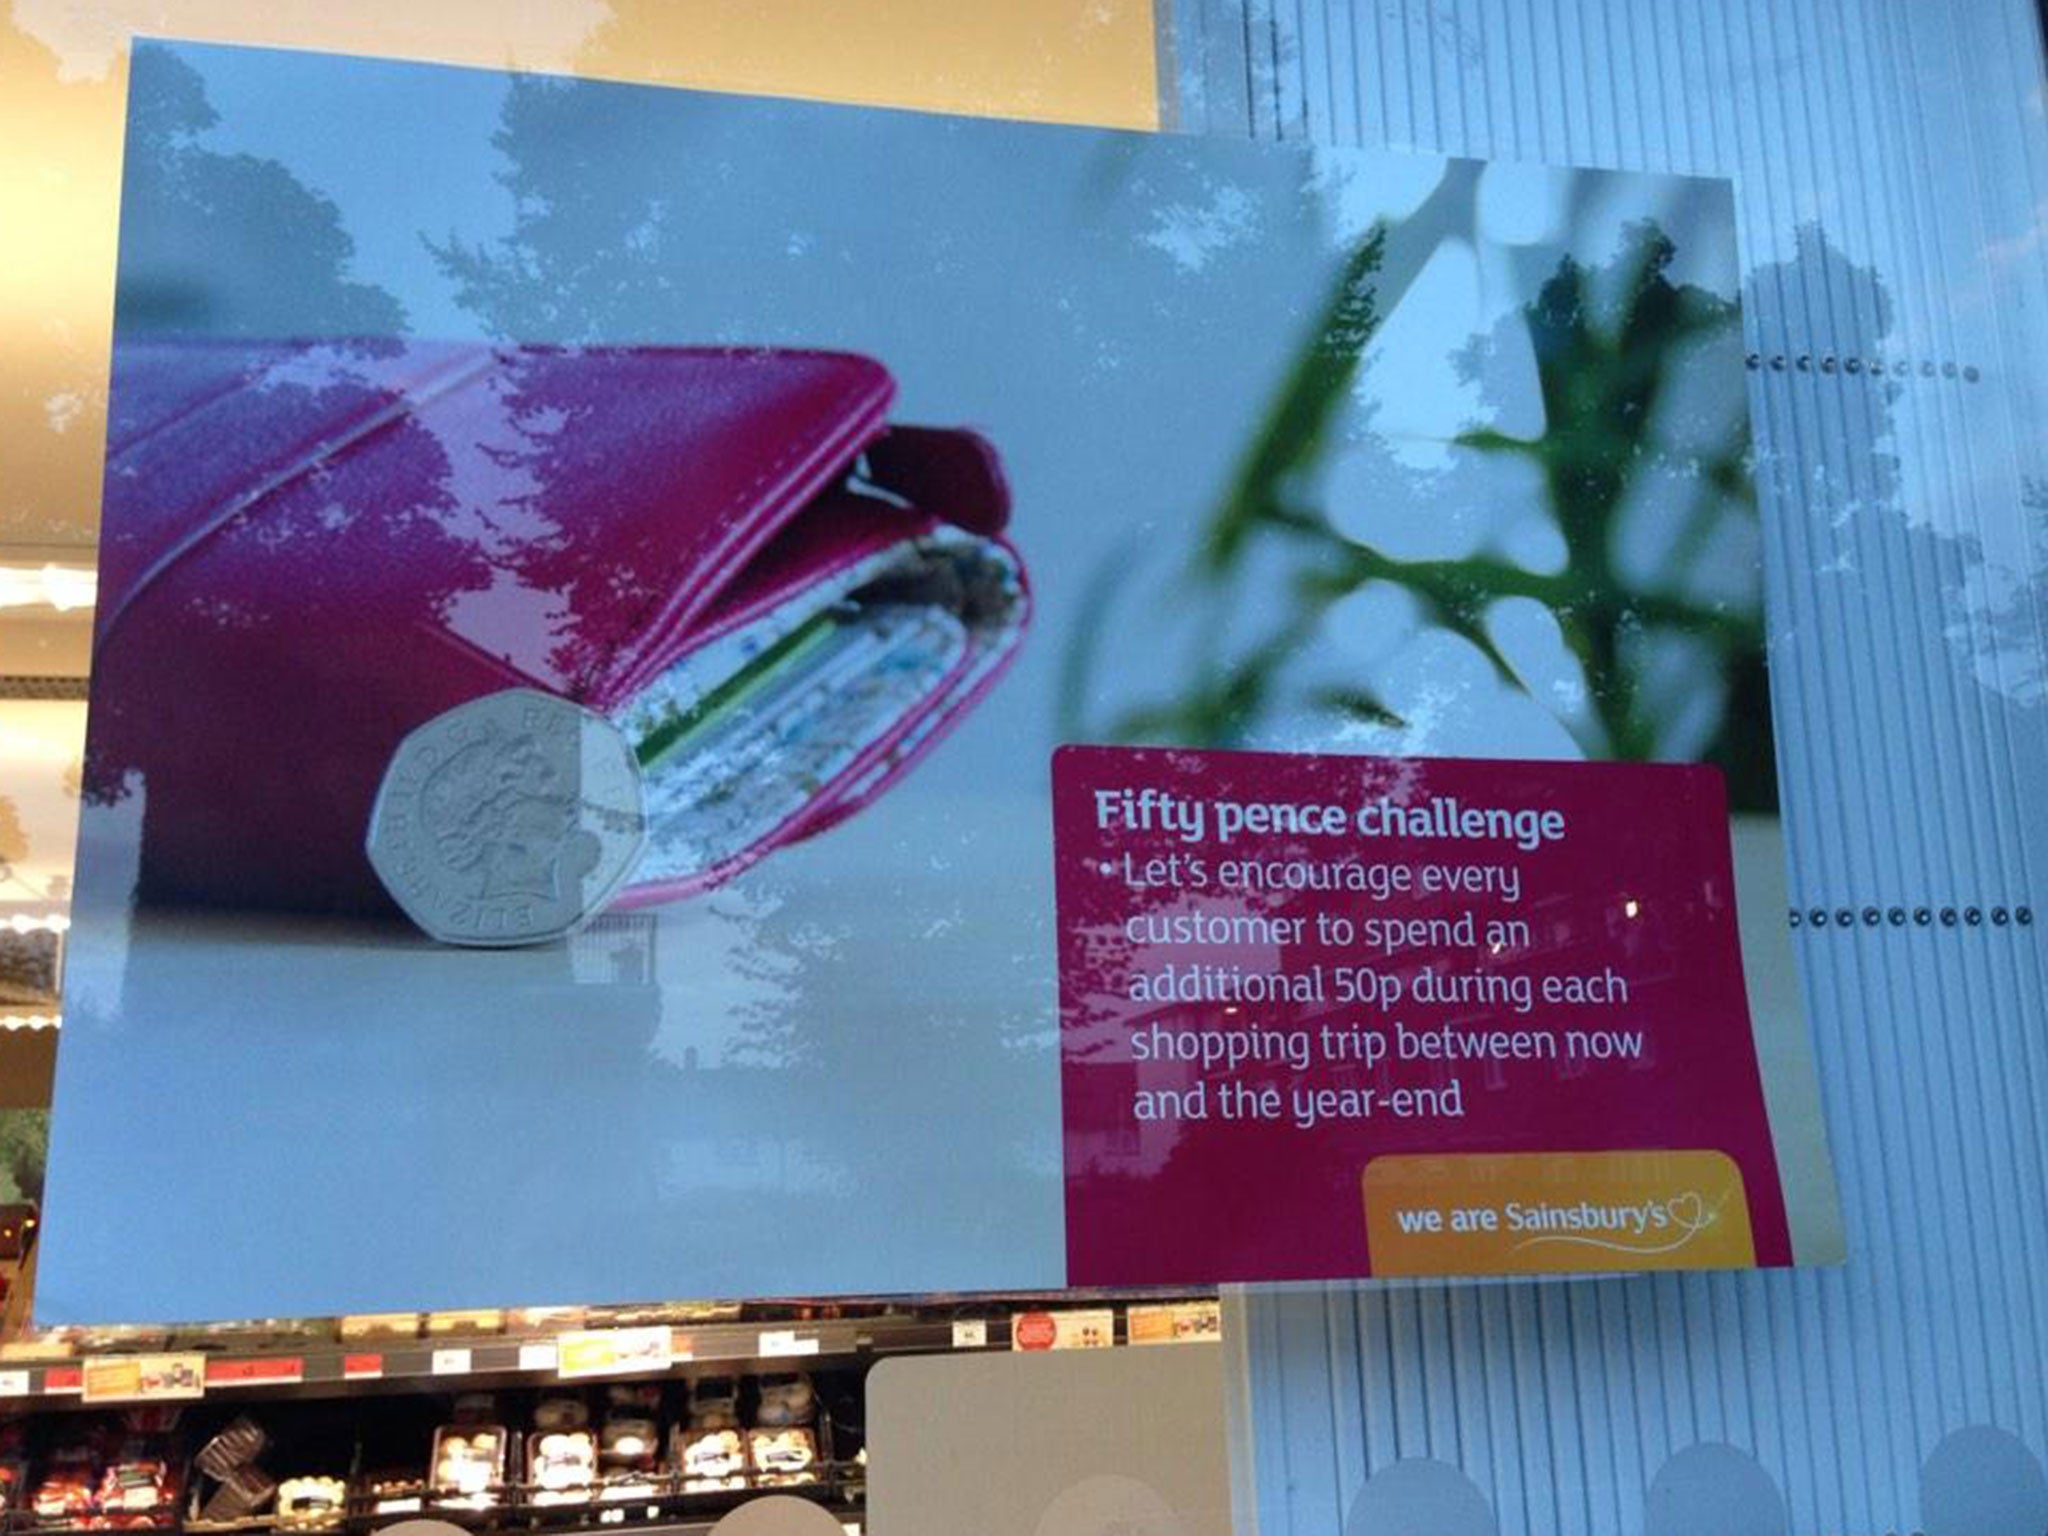 A poster telling staff at Sainsbury’s to encourage customers to spend more was put up in the shop window instead of the staff room by accident